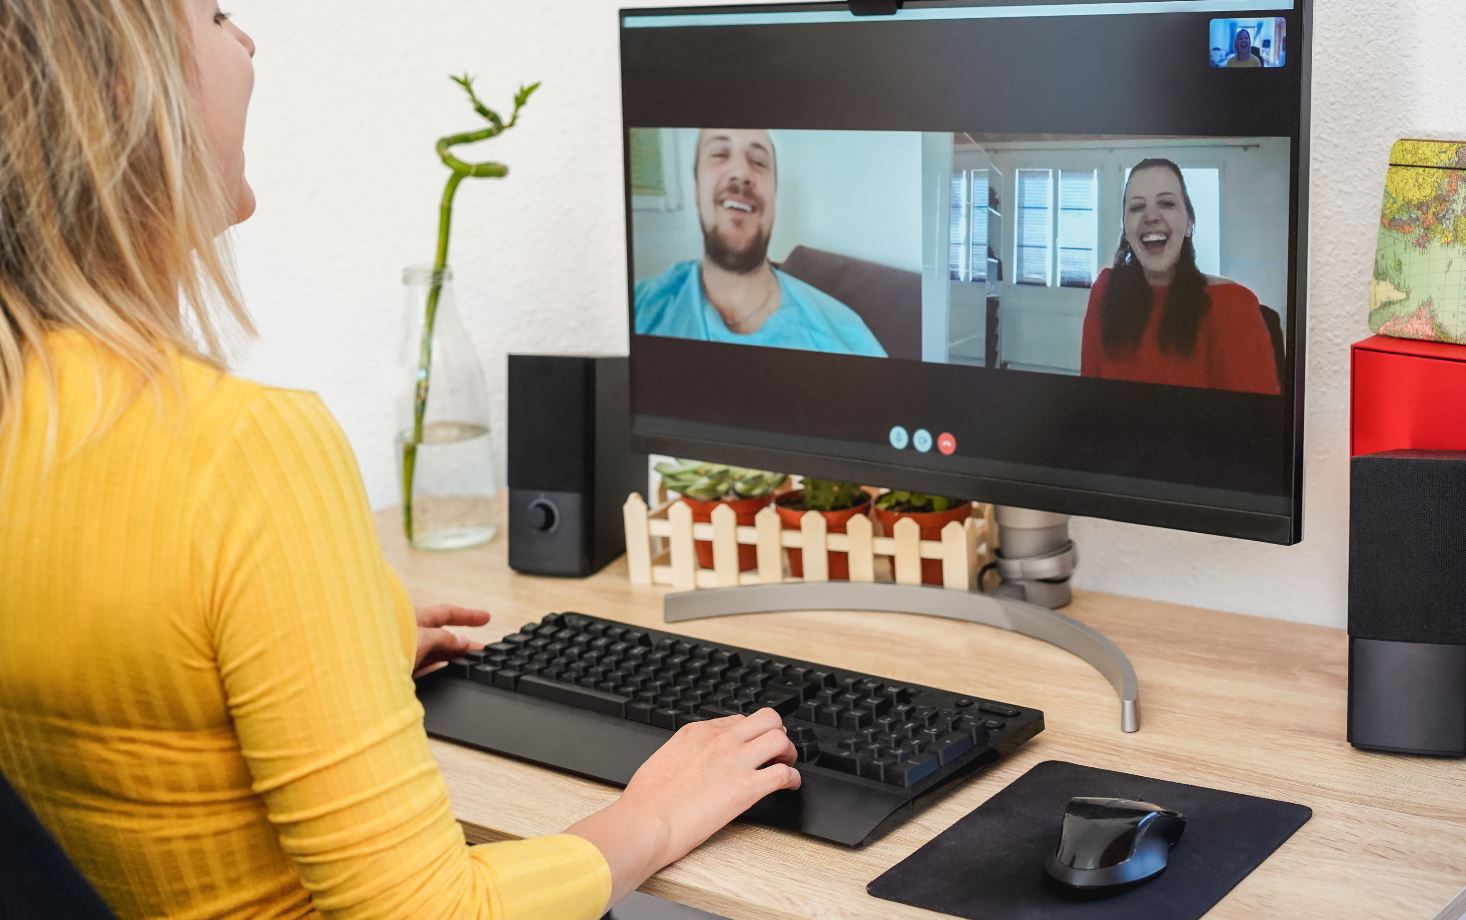 Image of an online conference with 3 people.